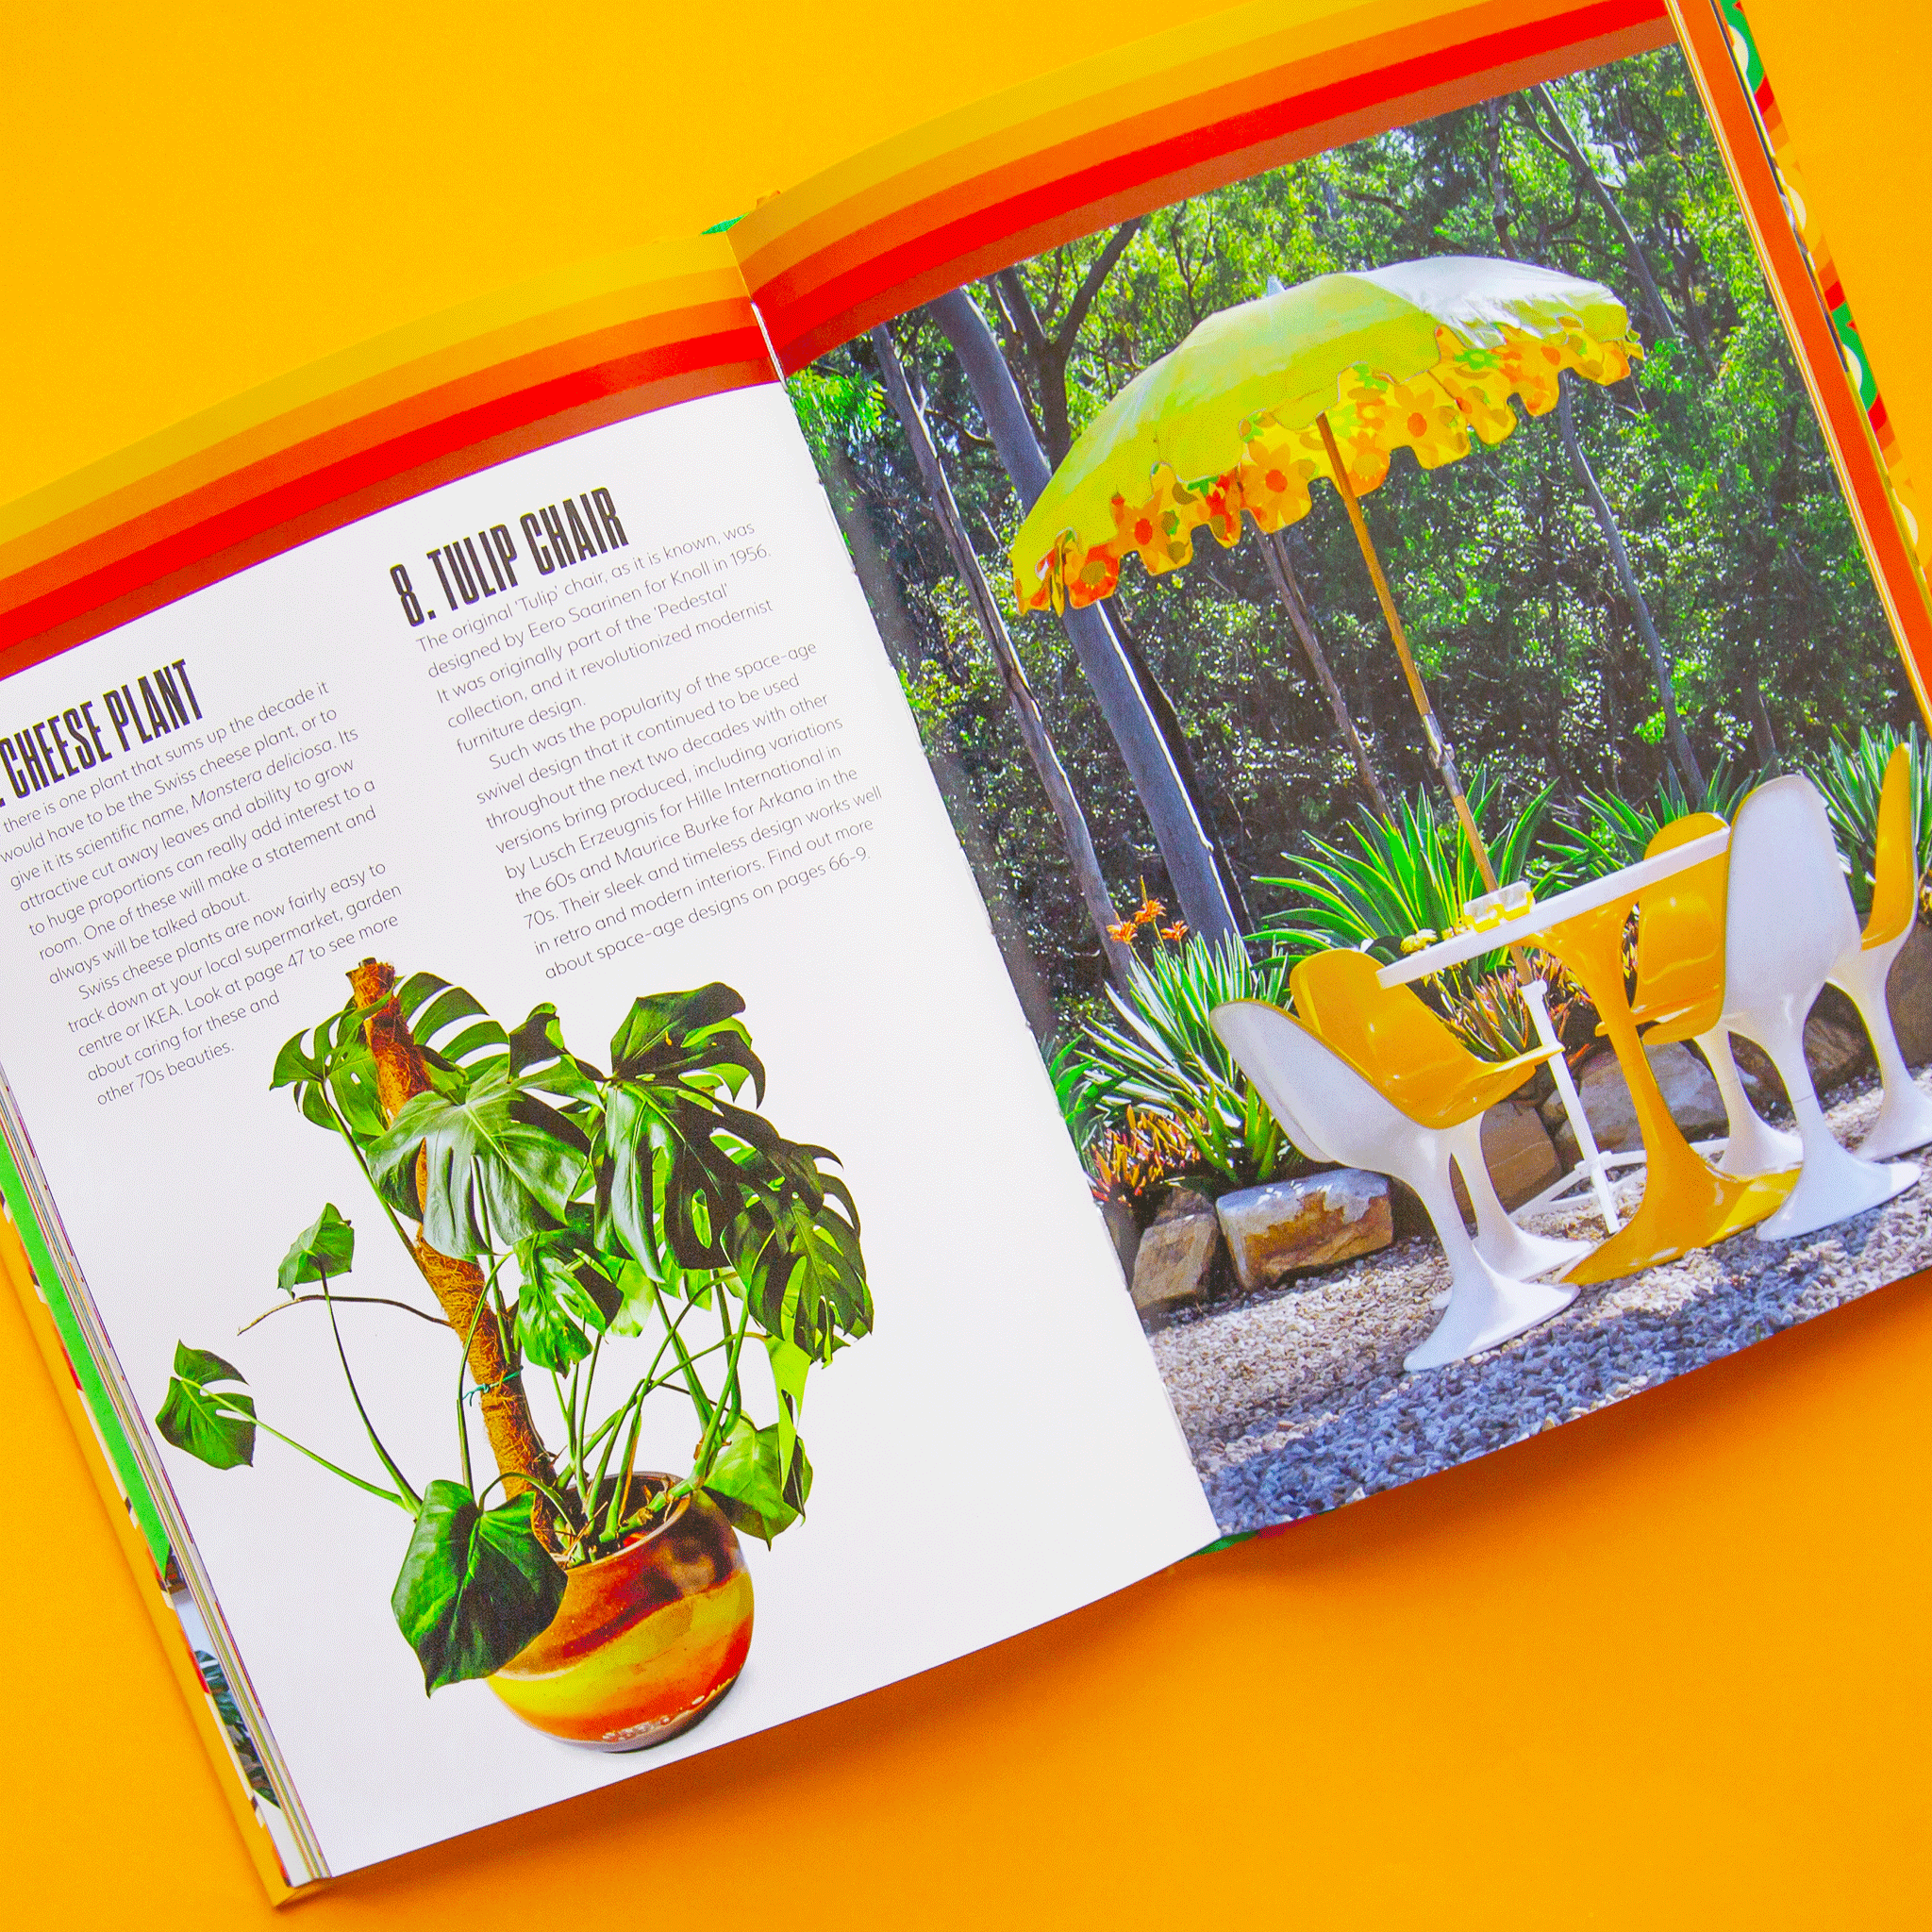  On a yellow background is a look at the inside of the book that features vibrant colors, text and photos of retro spaces.